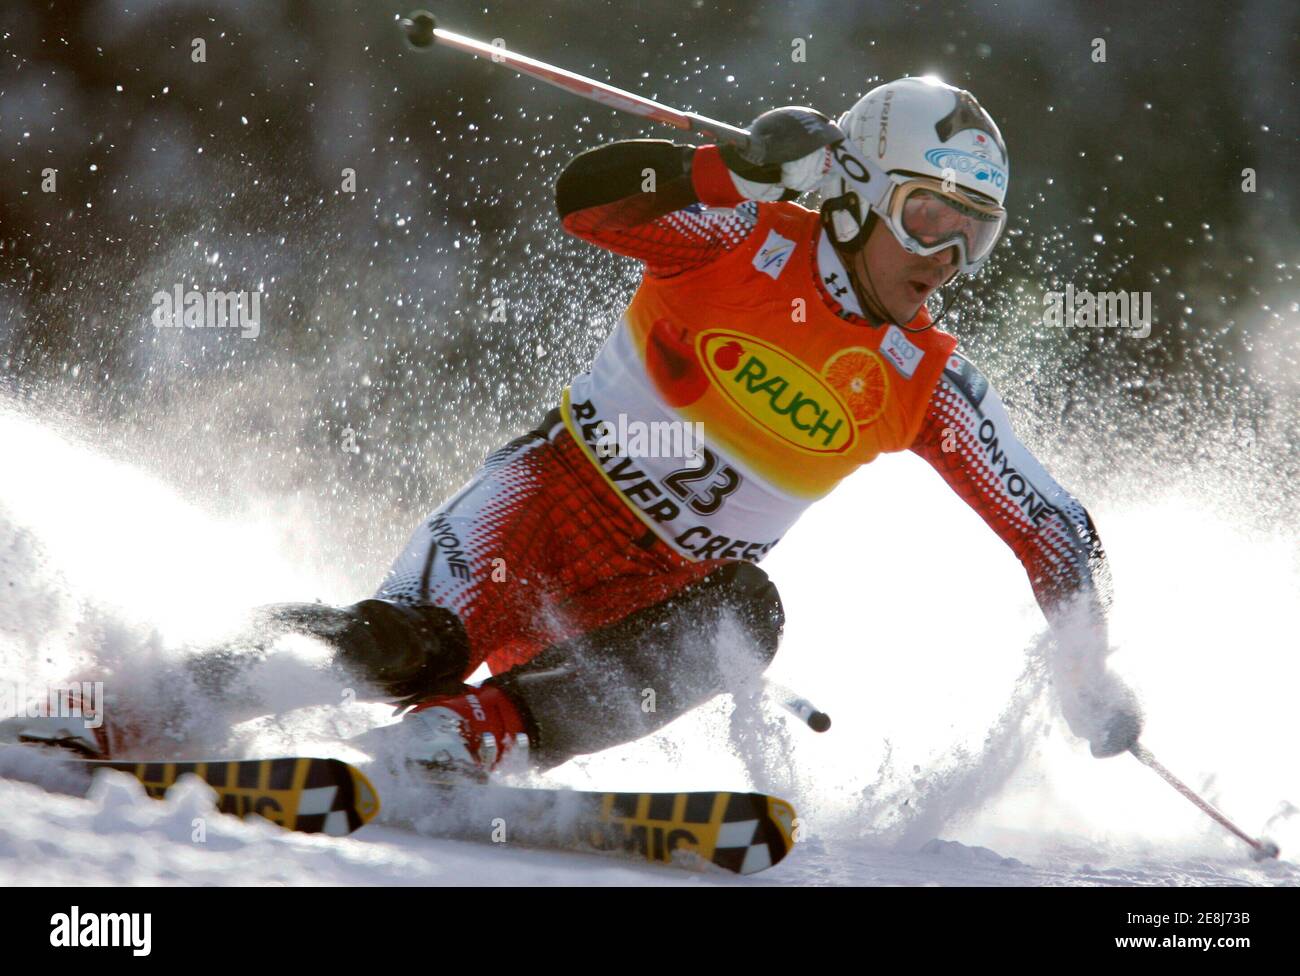 Kentaro Minagawa of Japan skis to the ninth best time in the men's World Cup slalom in Beaver Creek, Colorado December 4, 2005. Benjamin Raich of Austria came in first place while Italy's Giorgio Rocca came in second and Mario Matt of Austria third. REUTERS/Rick Wilking Stock Photo